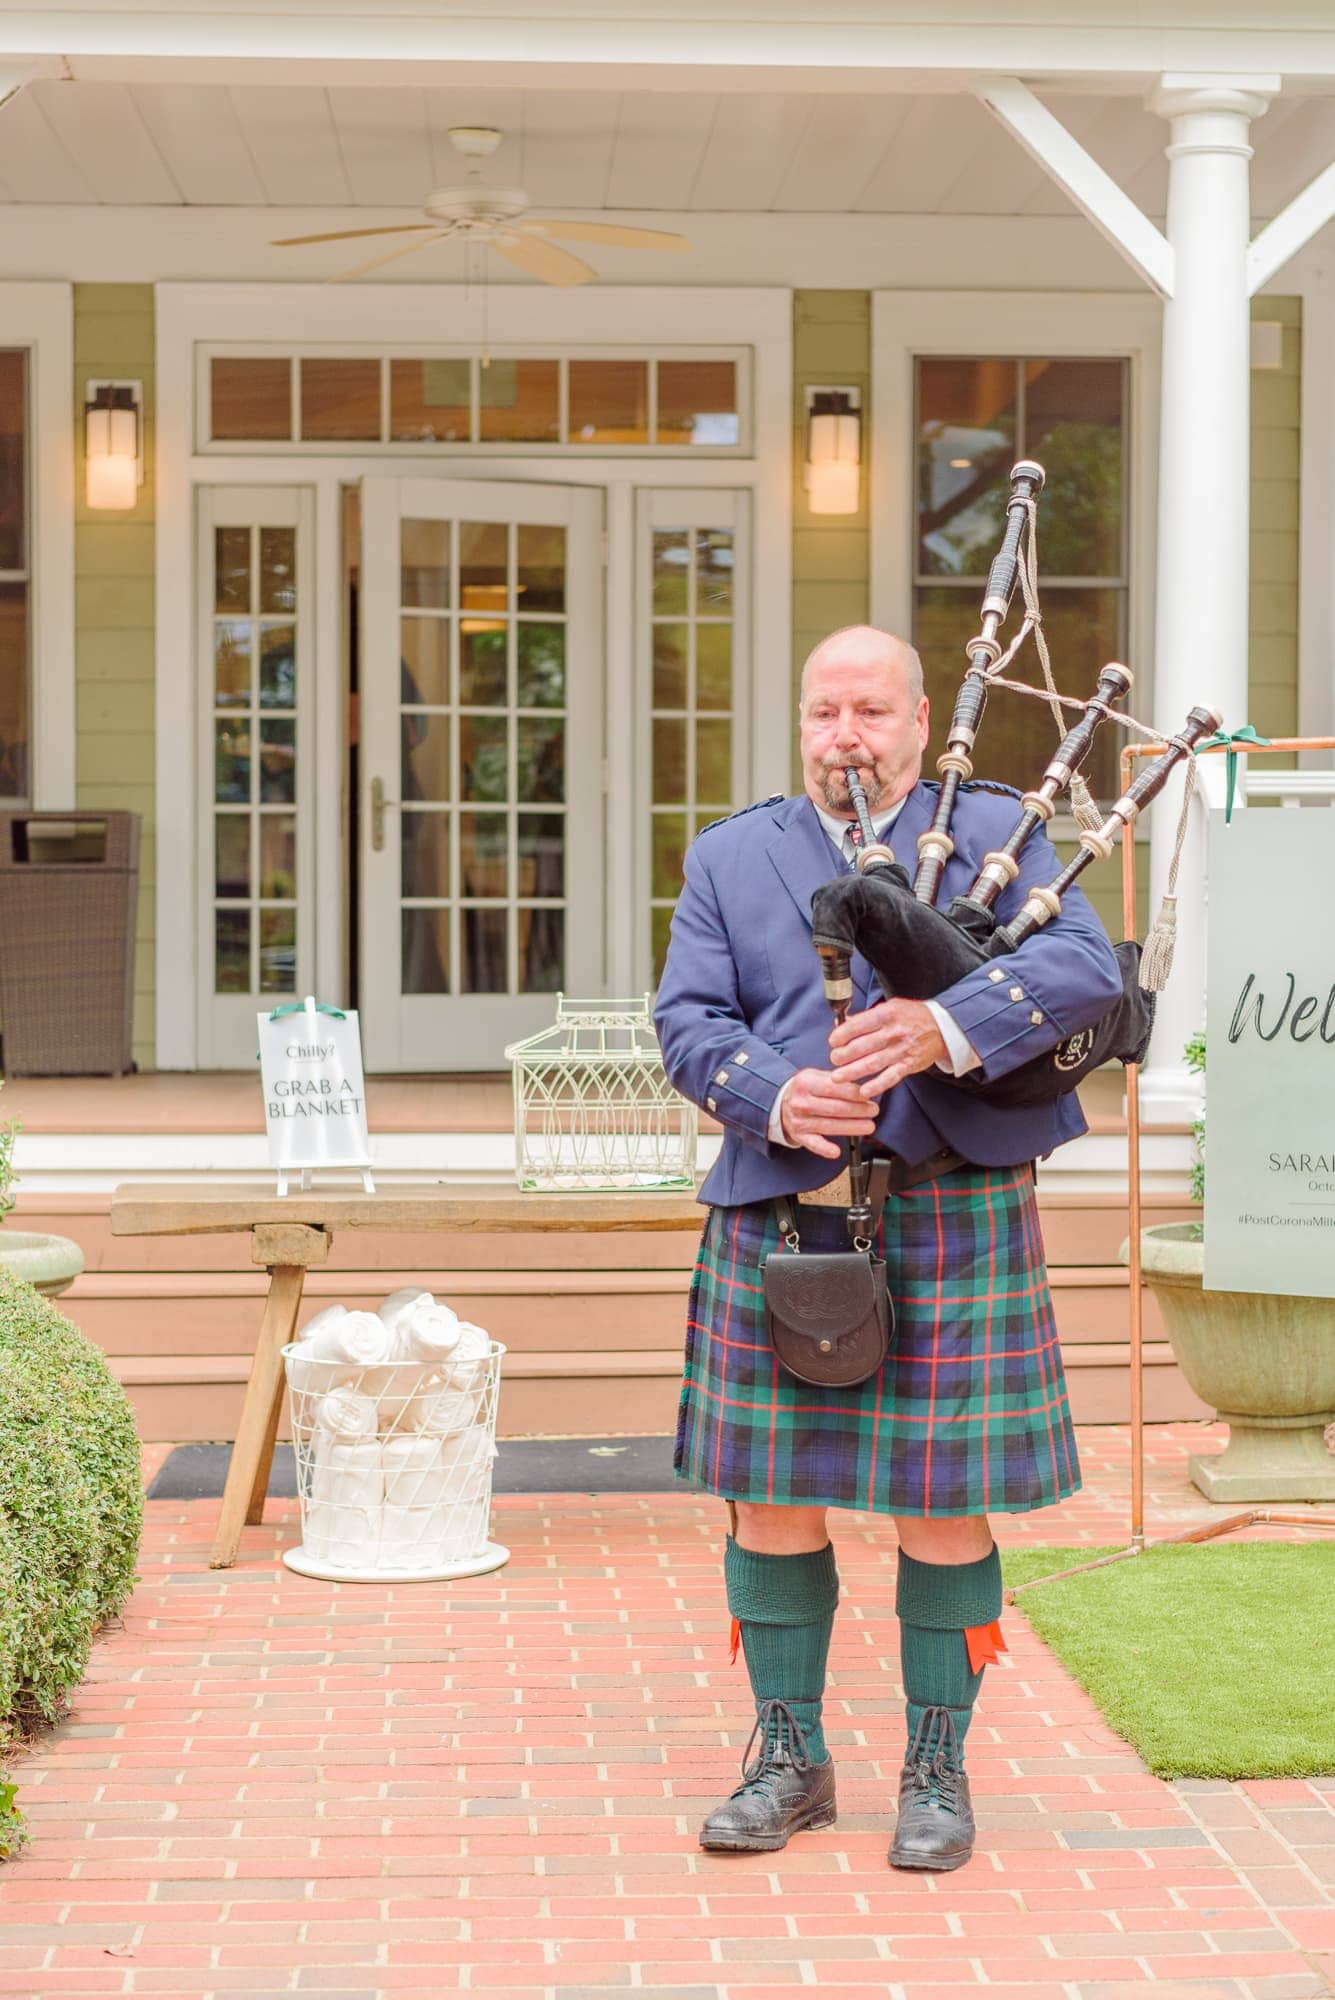 A bagpiper in traditional Scottish garb plays a welcome melody on the front steps of the Whitehead Manor.